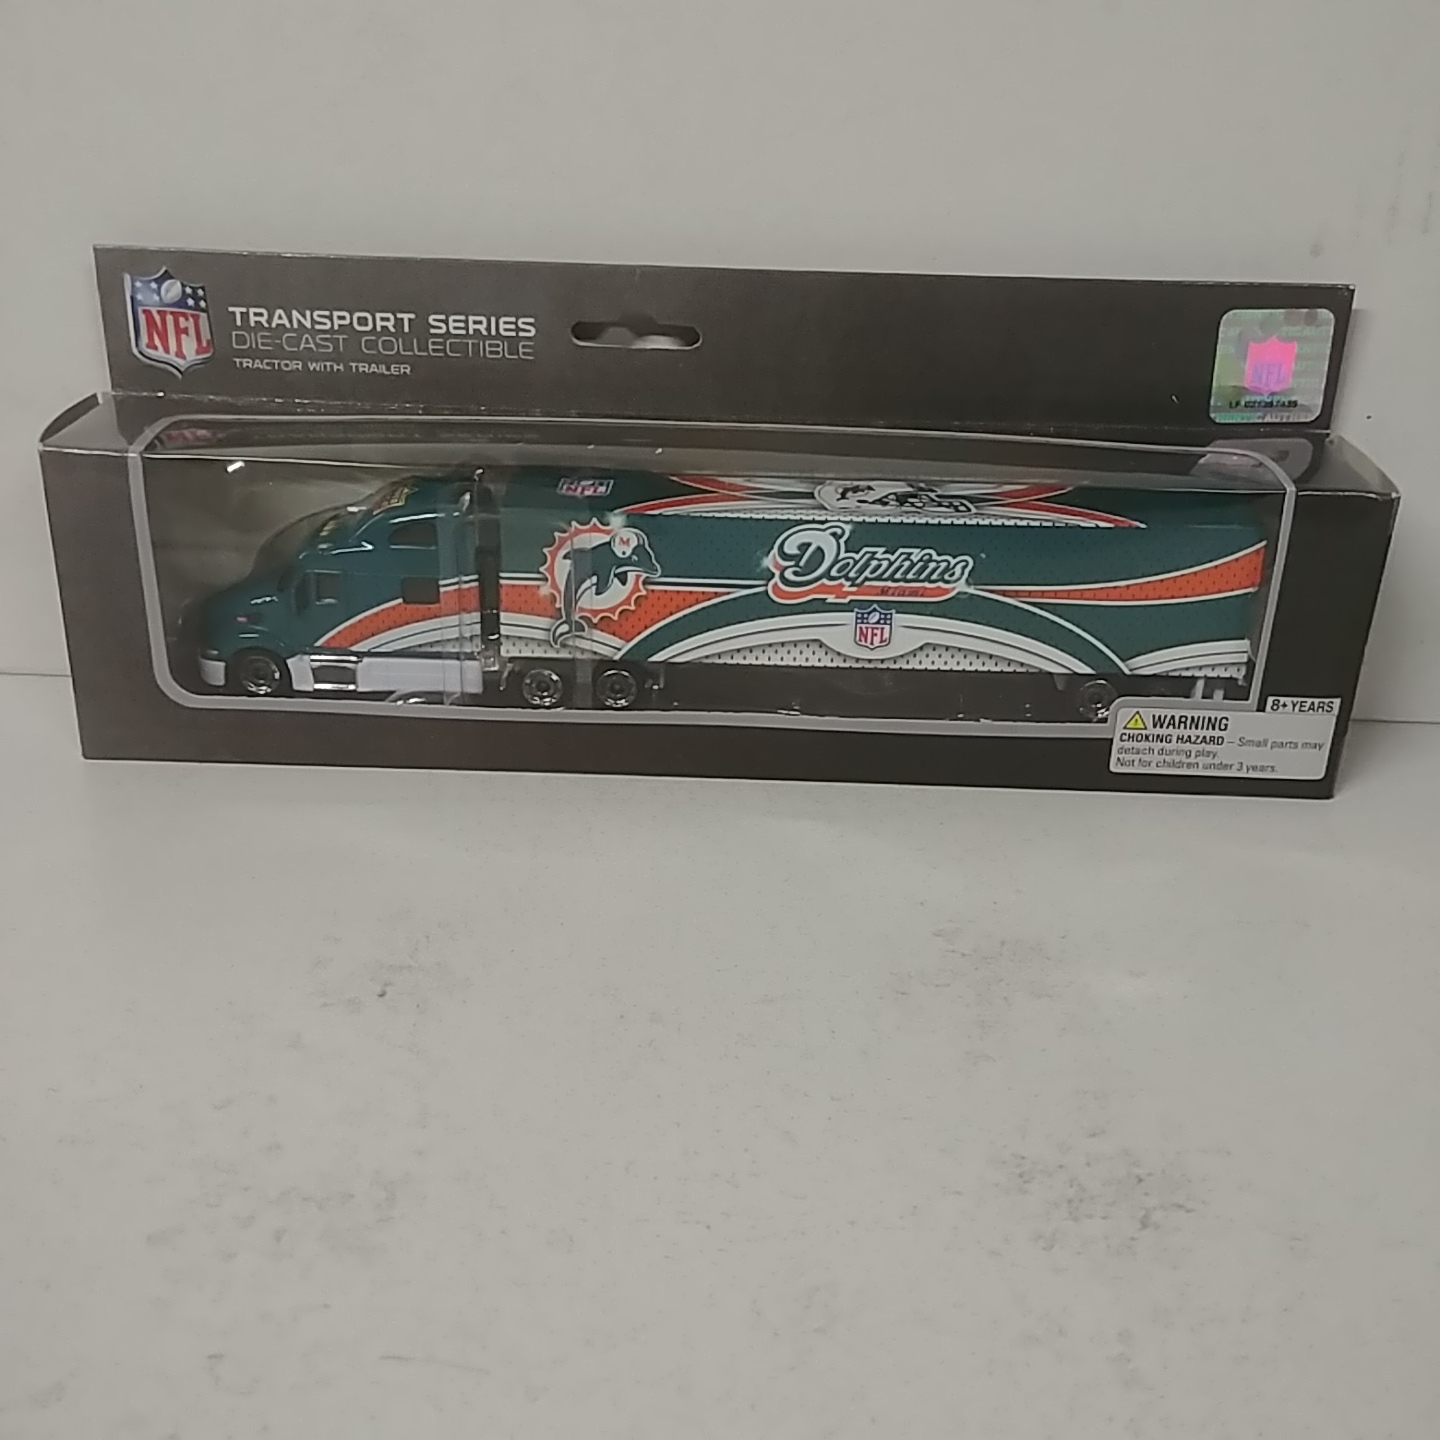 2008 Miami Dolphins 1/80th hauler by Upper Deck